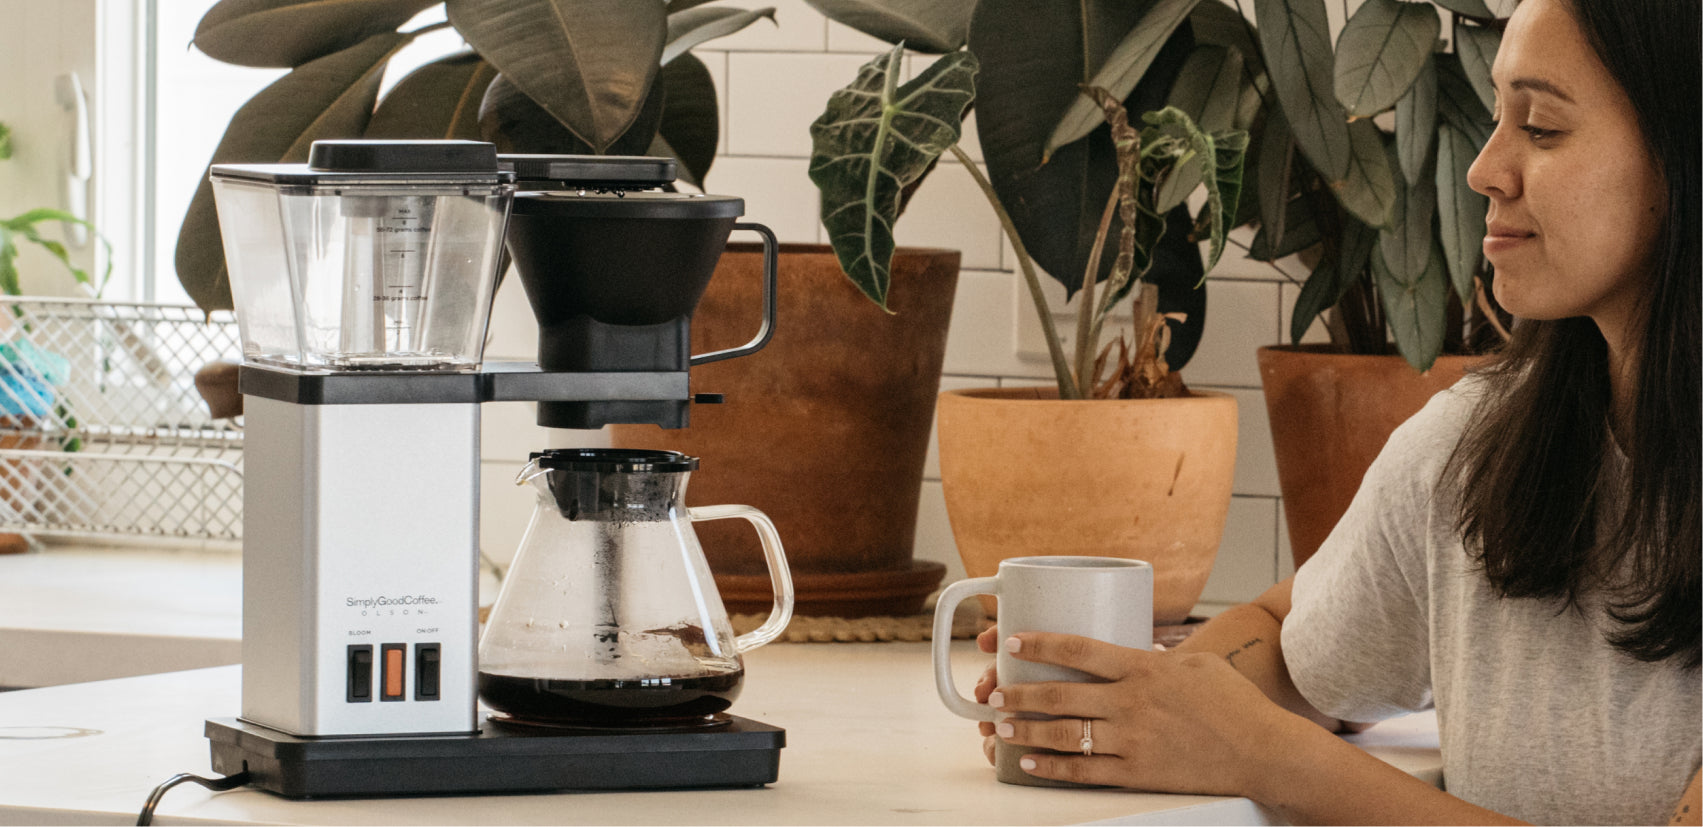 Simply Good Coffee Brewer: Budget Moccamaster or Just A Knock-Off